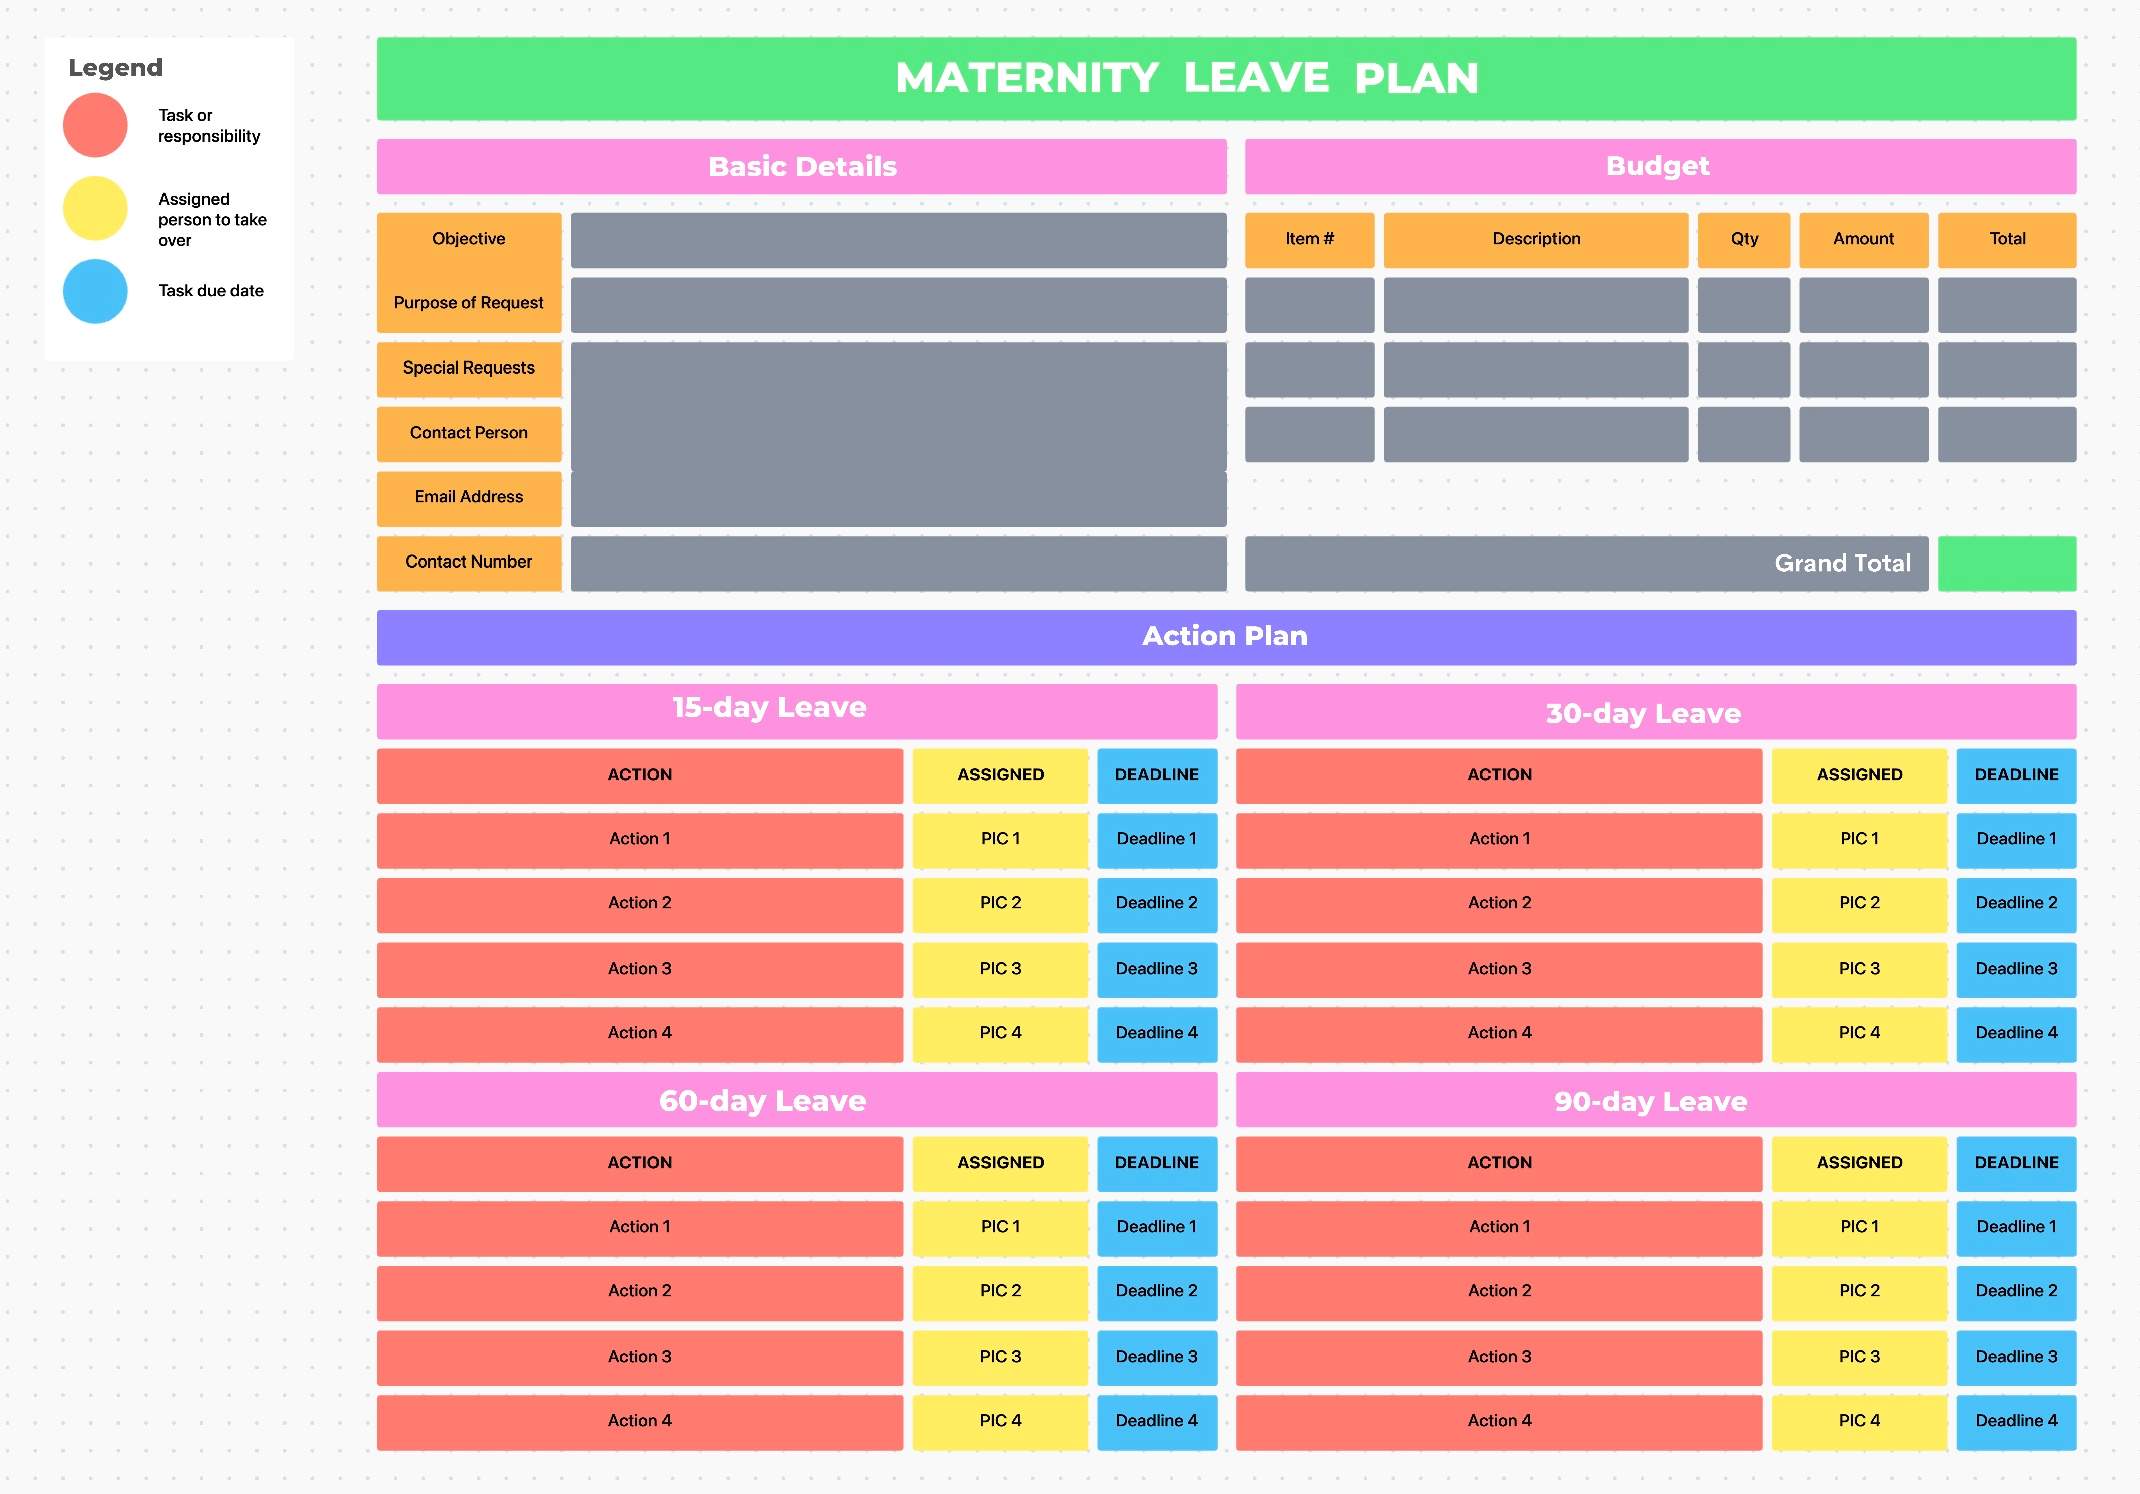 A Maternity Leave Plan is a guided template where a team member plots the responsibilities that will be handed over while she is taking her maternity leave.